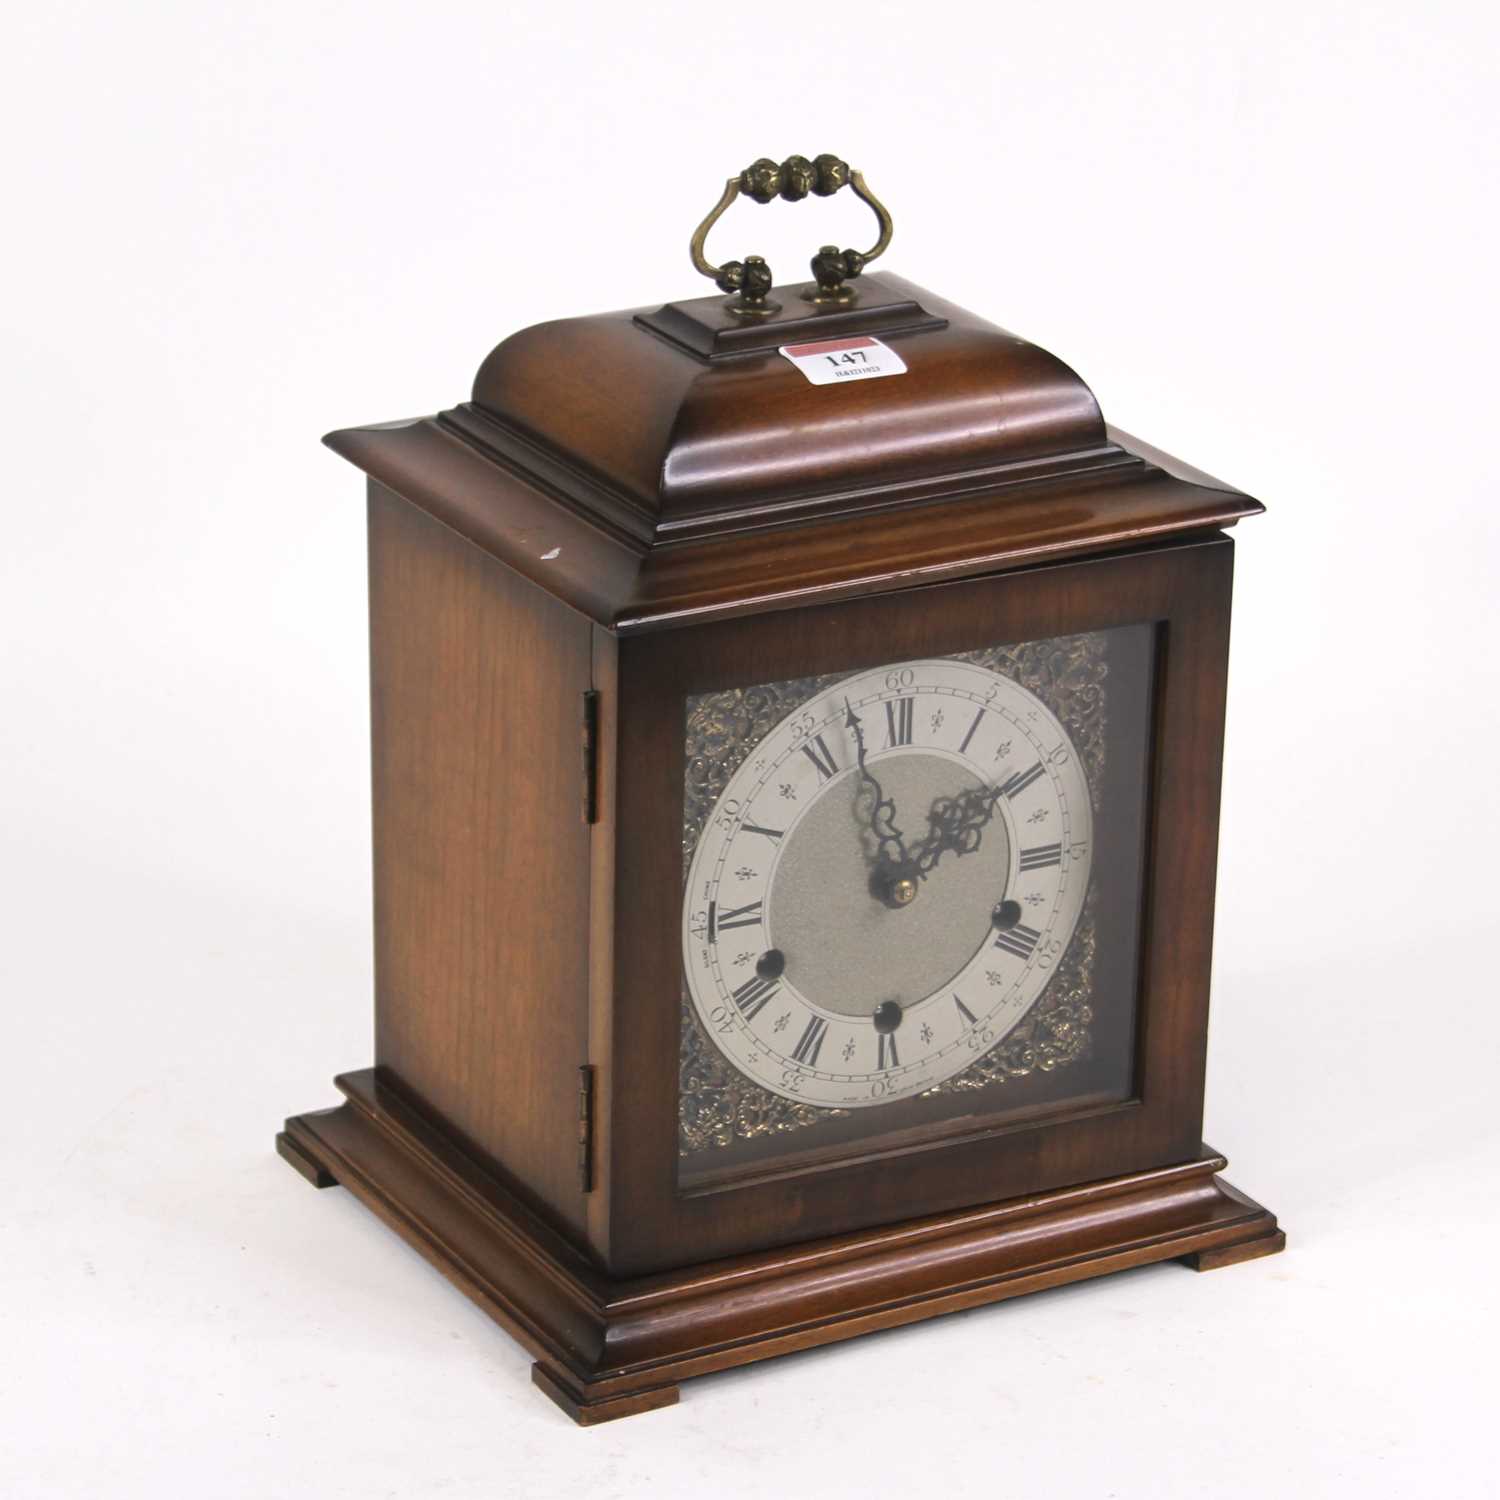 A walnut cased bracket clock in the 18th century style having a silvered chapter ring with Roman